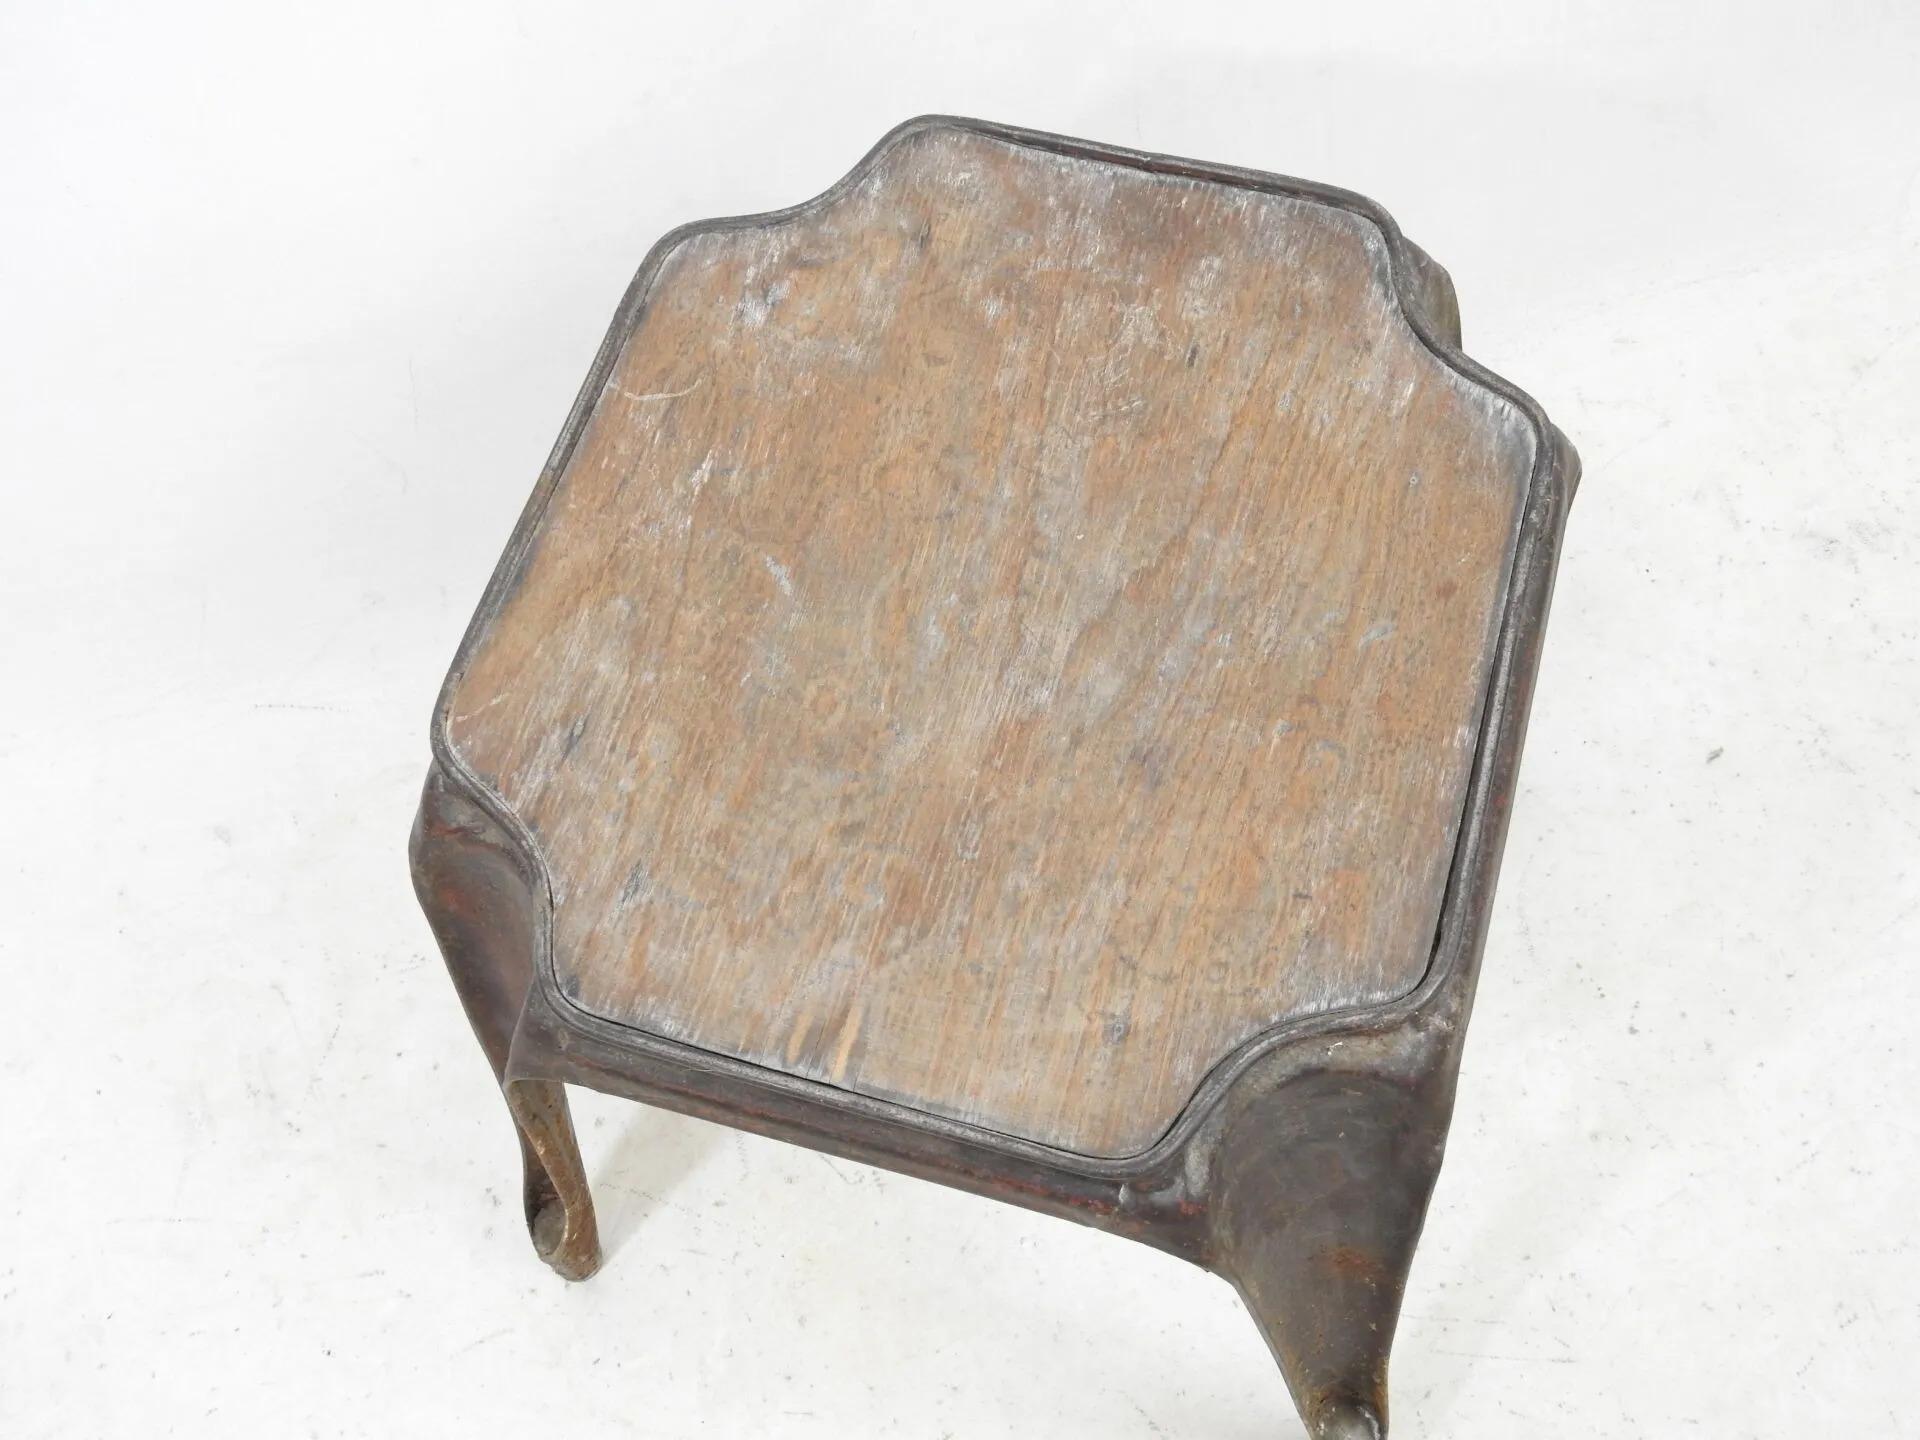 one stool circa 1950 
Normal wear, scratches, lack of peinyures, small superficial rust spots.